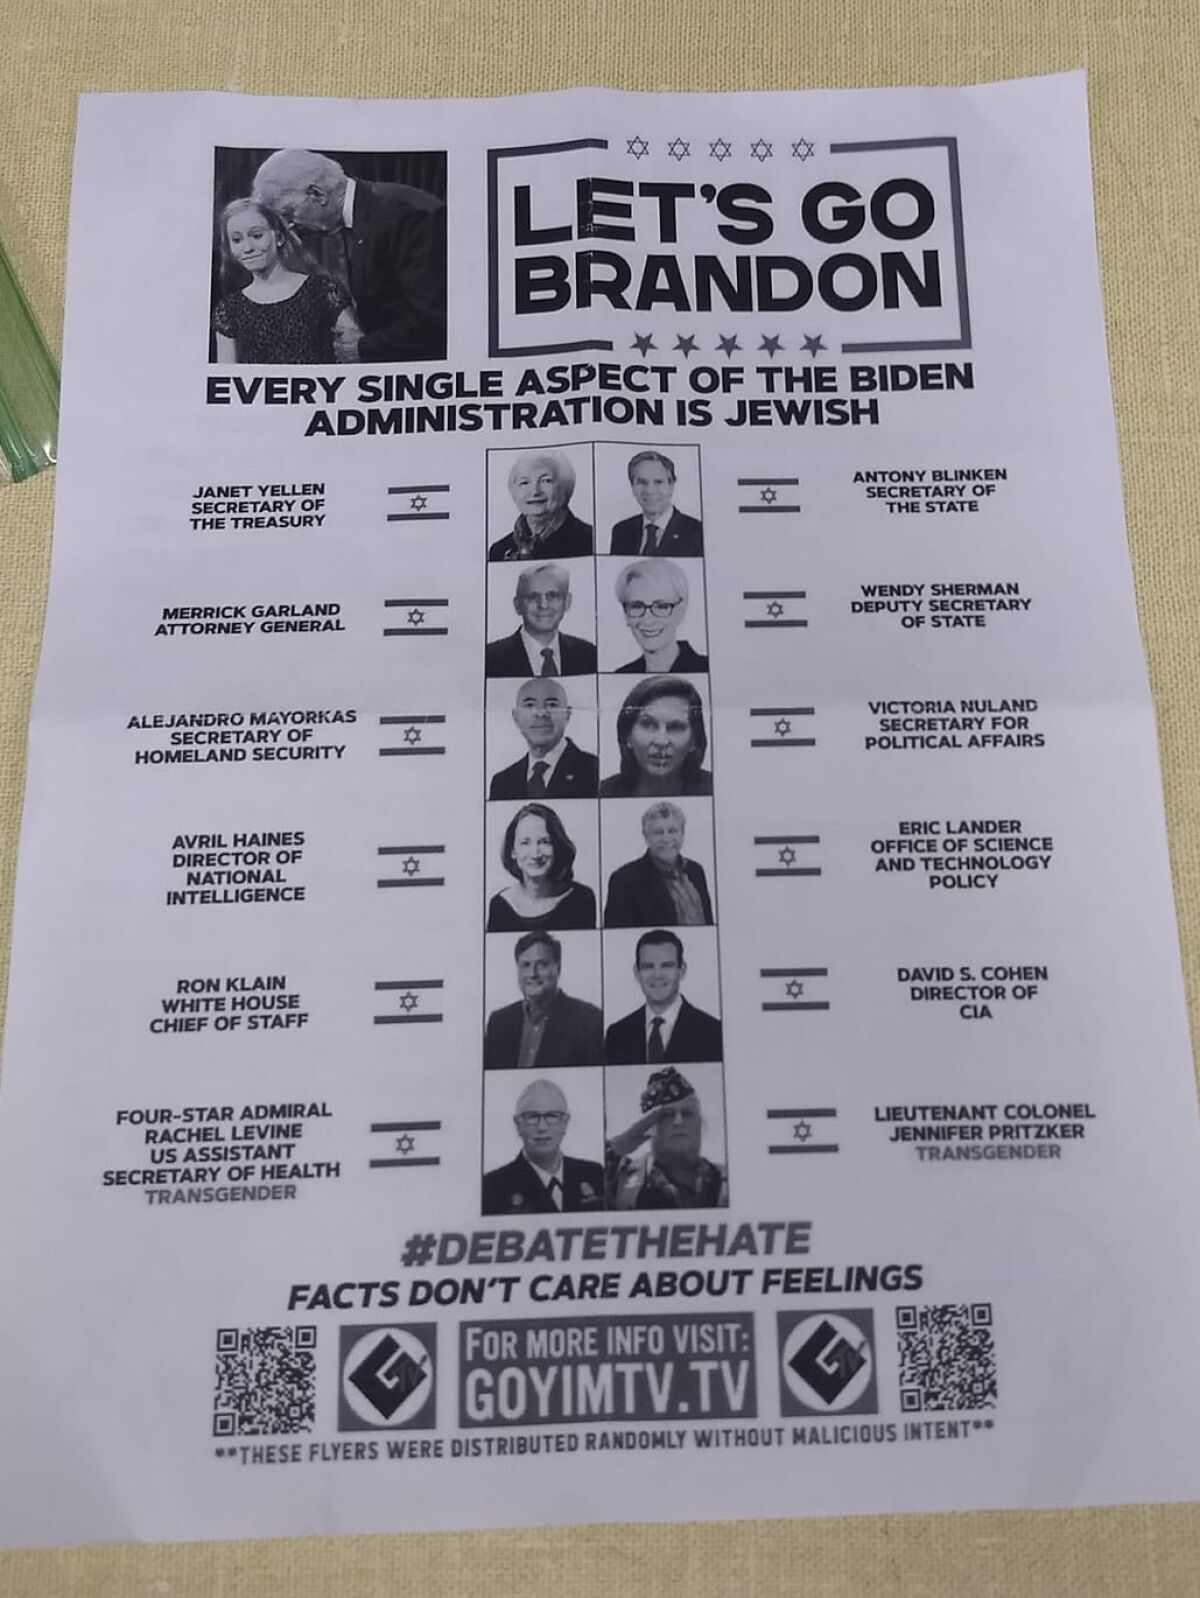 A flier that says "Let's go Brandon. Every single aspect of the Biden administration is Jewish"